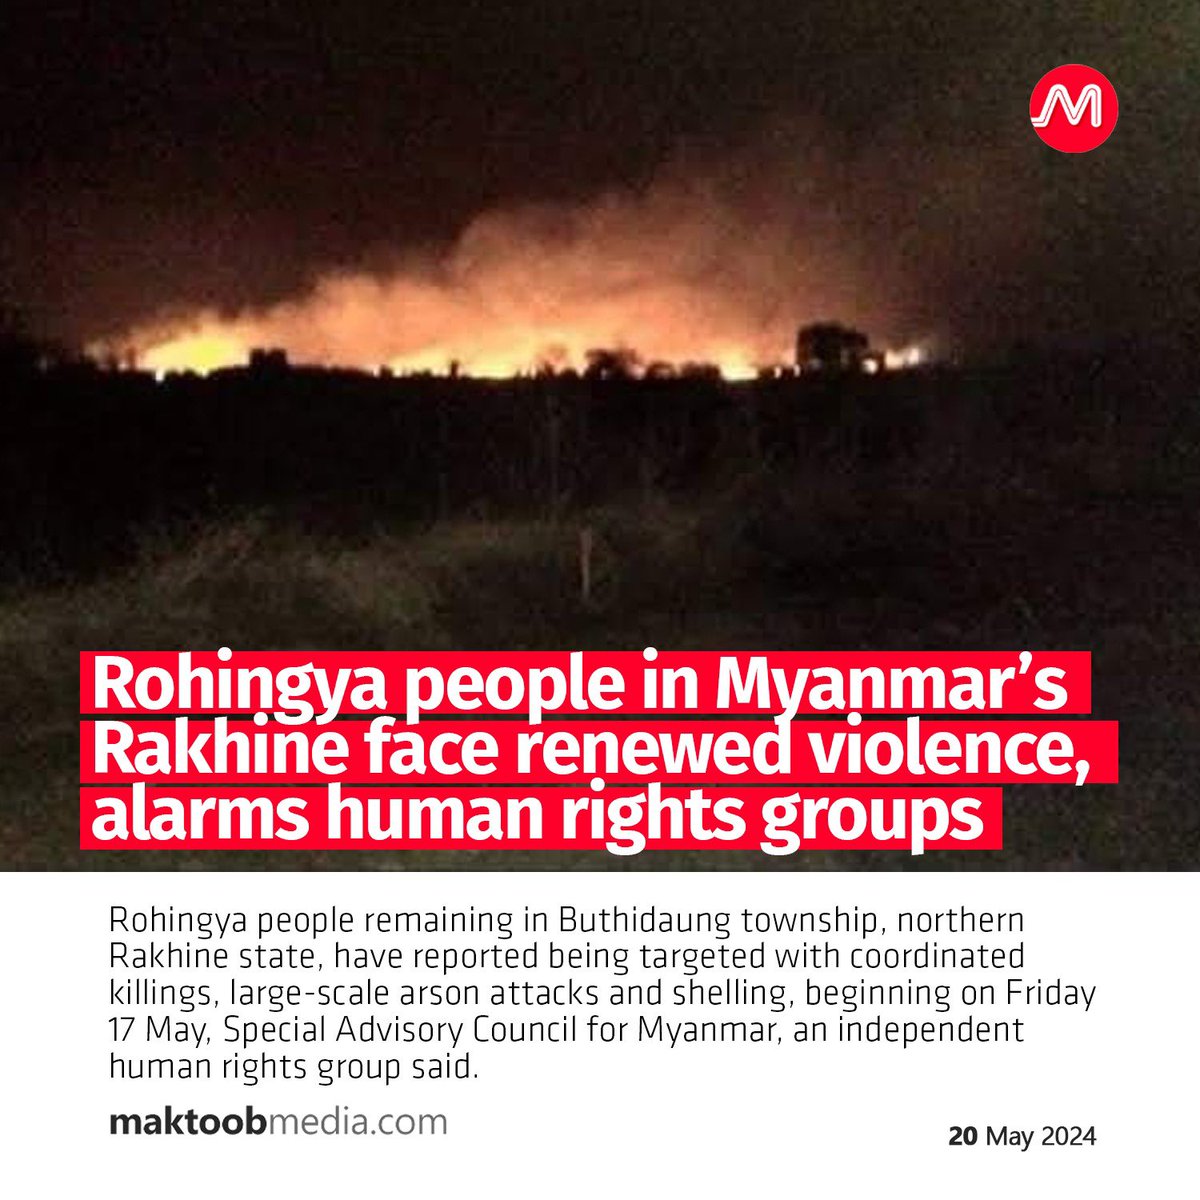 Rohingya people remaining in Buthidaung township, northern Rakhine state, have reported being targeted with coordinated killings, large-scale arson attacks and shelling, beginning on Friday 17 May, Special Advisory Council for Myanmar, an independent human rights group said.